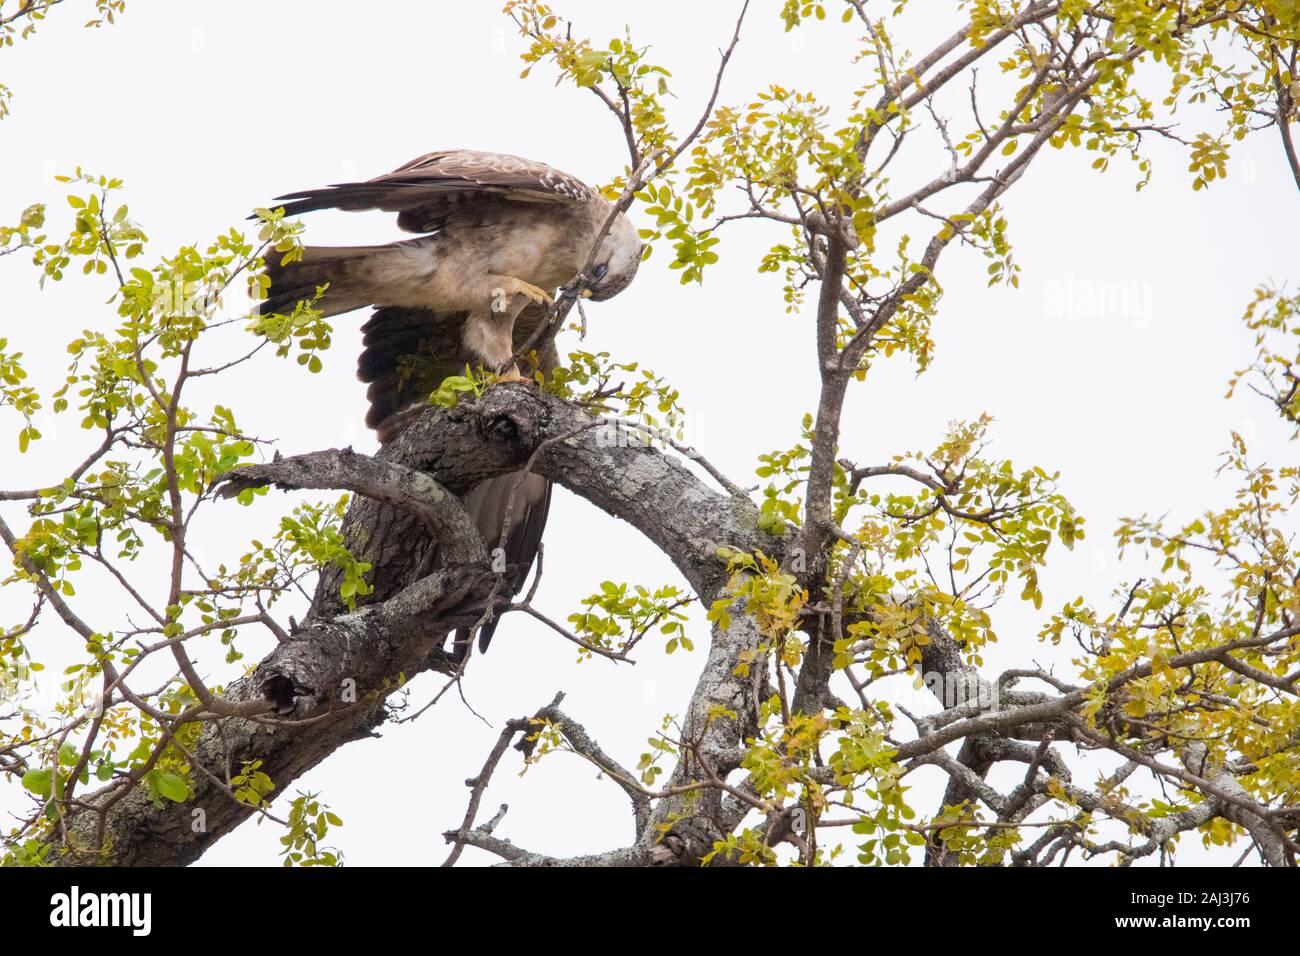 Wahlberg's Eagle (Hieraaetus wahlbergi), pale  morph adult collecting branches for its nest, Mpumalanga, South Africa Stock Photo